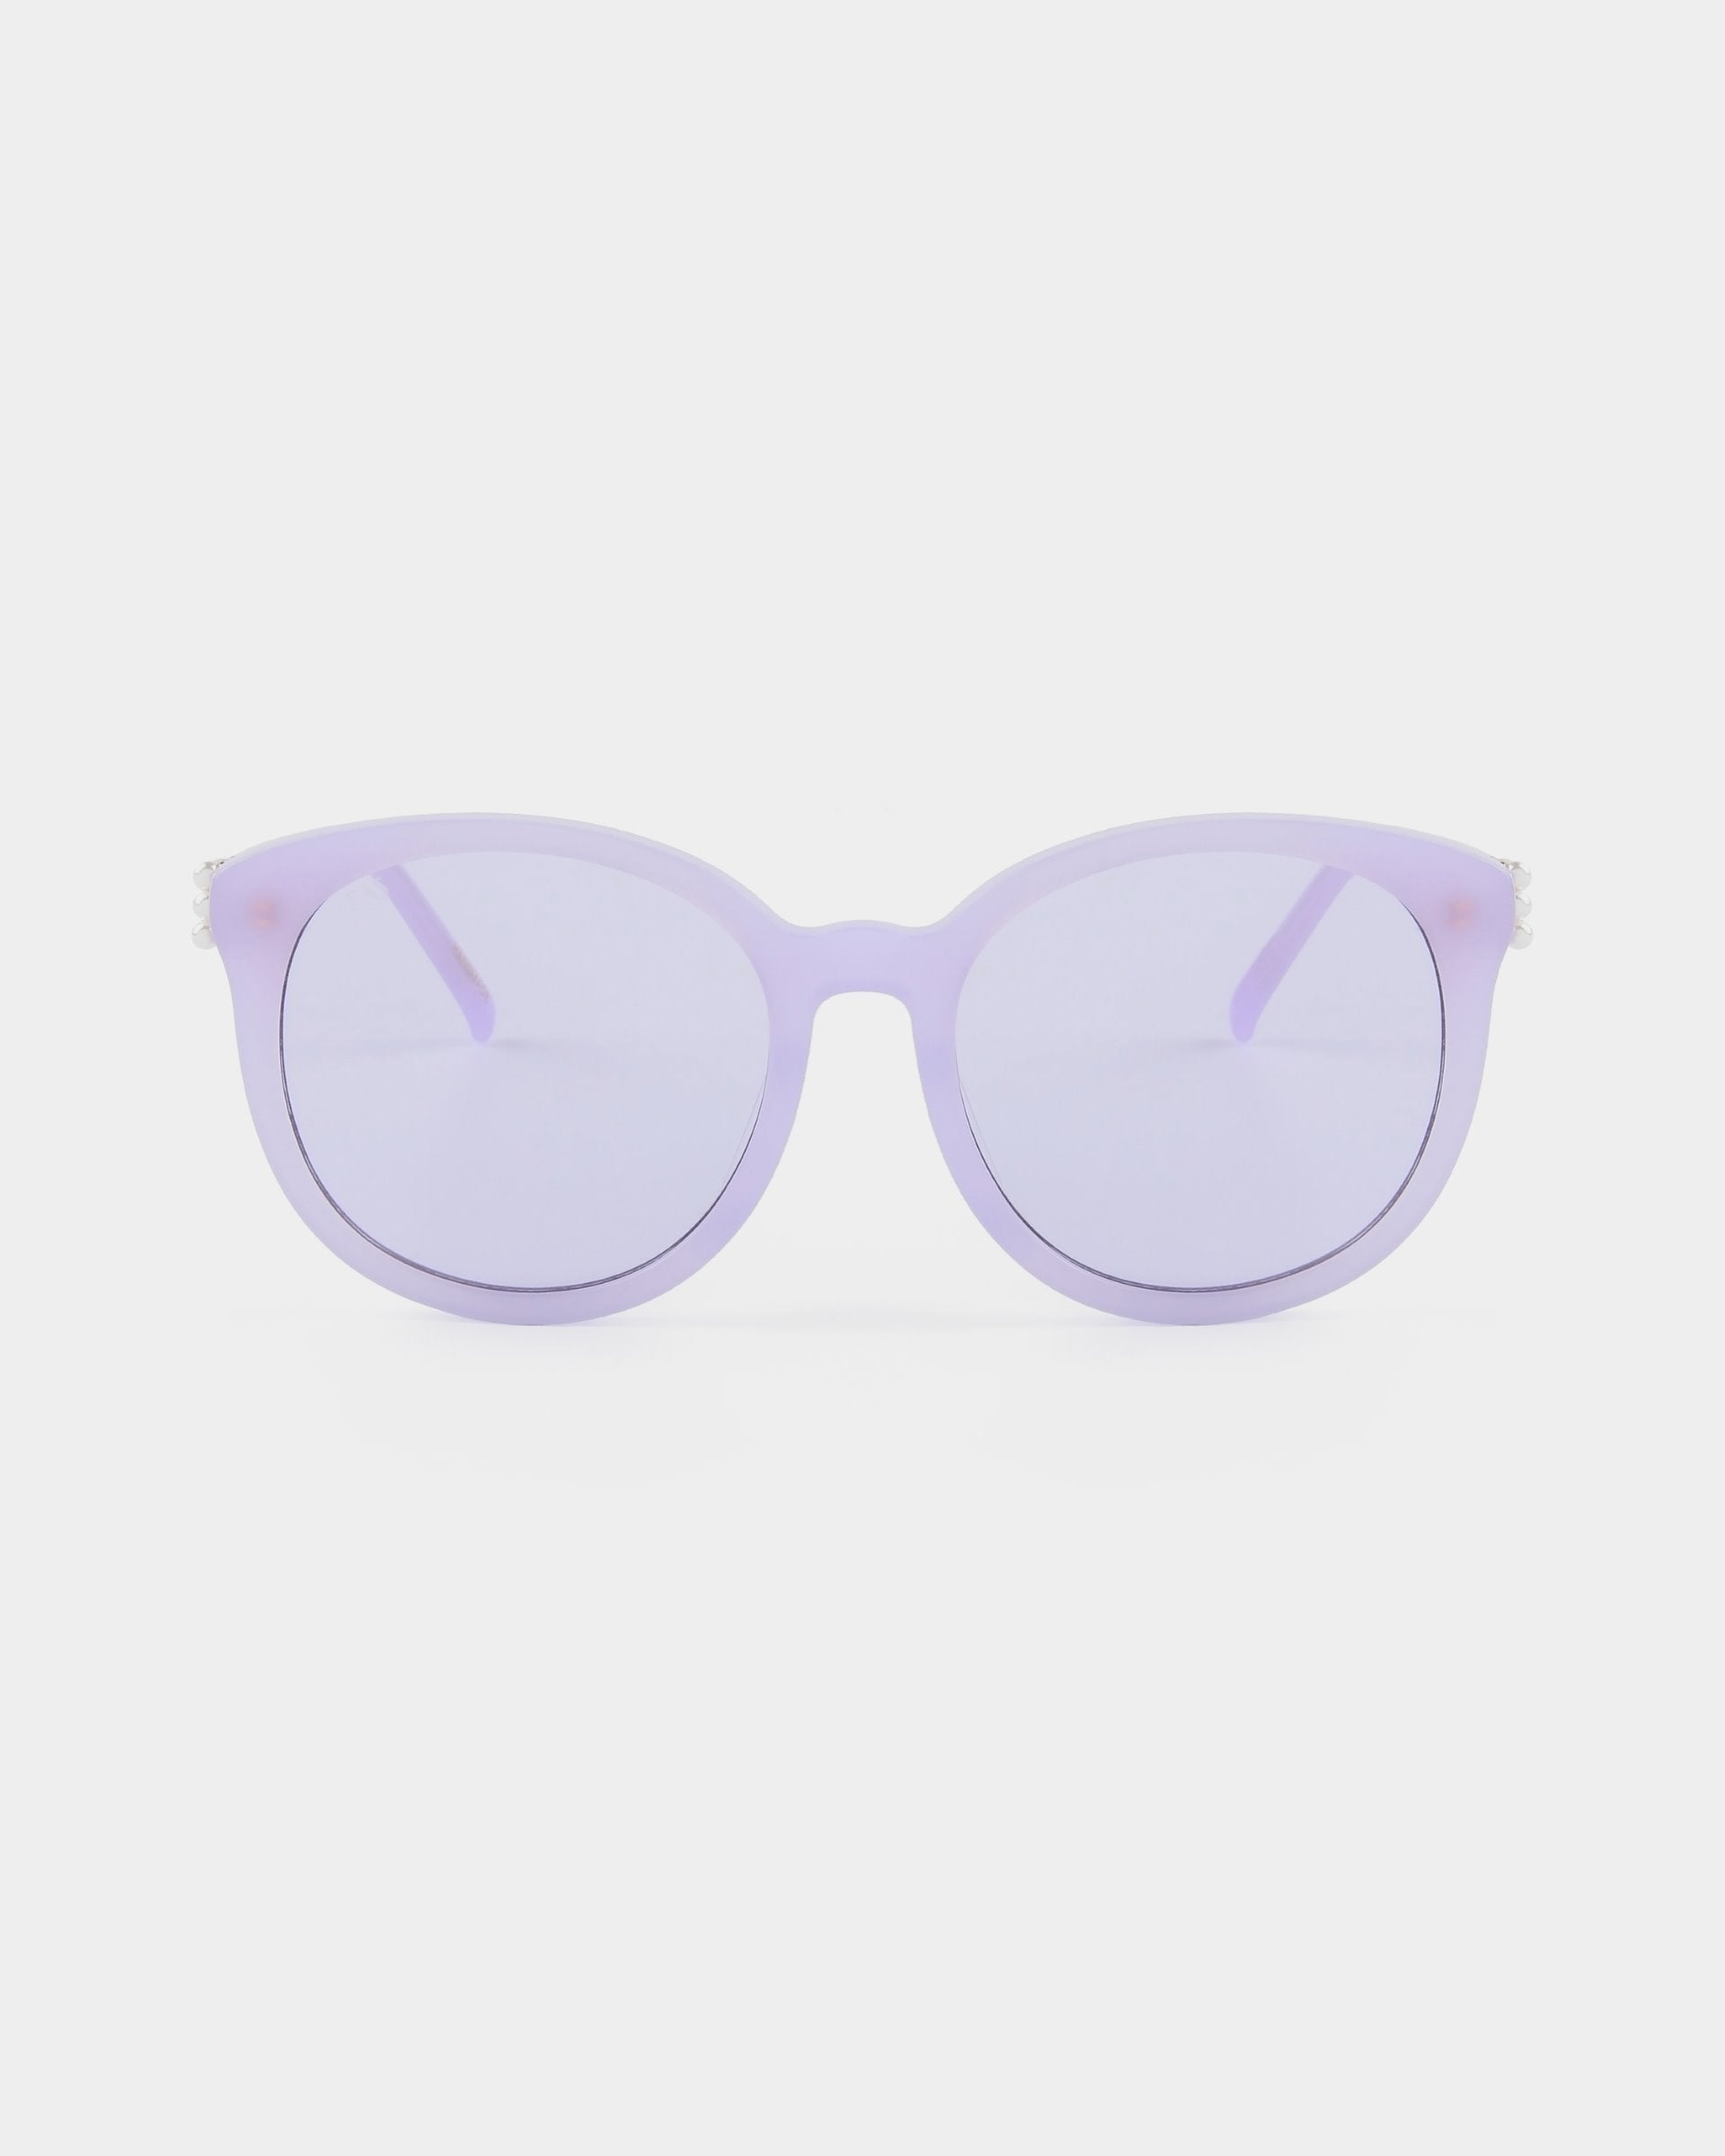 A pair of rounded lavender Scarlett sunglasses from For Art's Sake® with lightly tinted purple lenses against a white background. The frames are solid-colored, and the temples appear to be the same shade of lavender. Featuring ultralightweight shatter-resistant lenses, these sunglasses provide 100% UVA & UVB protection.